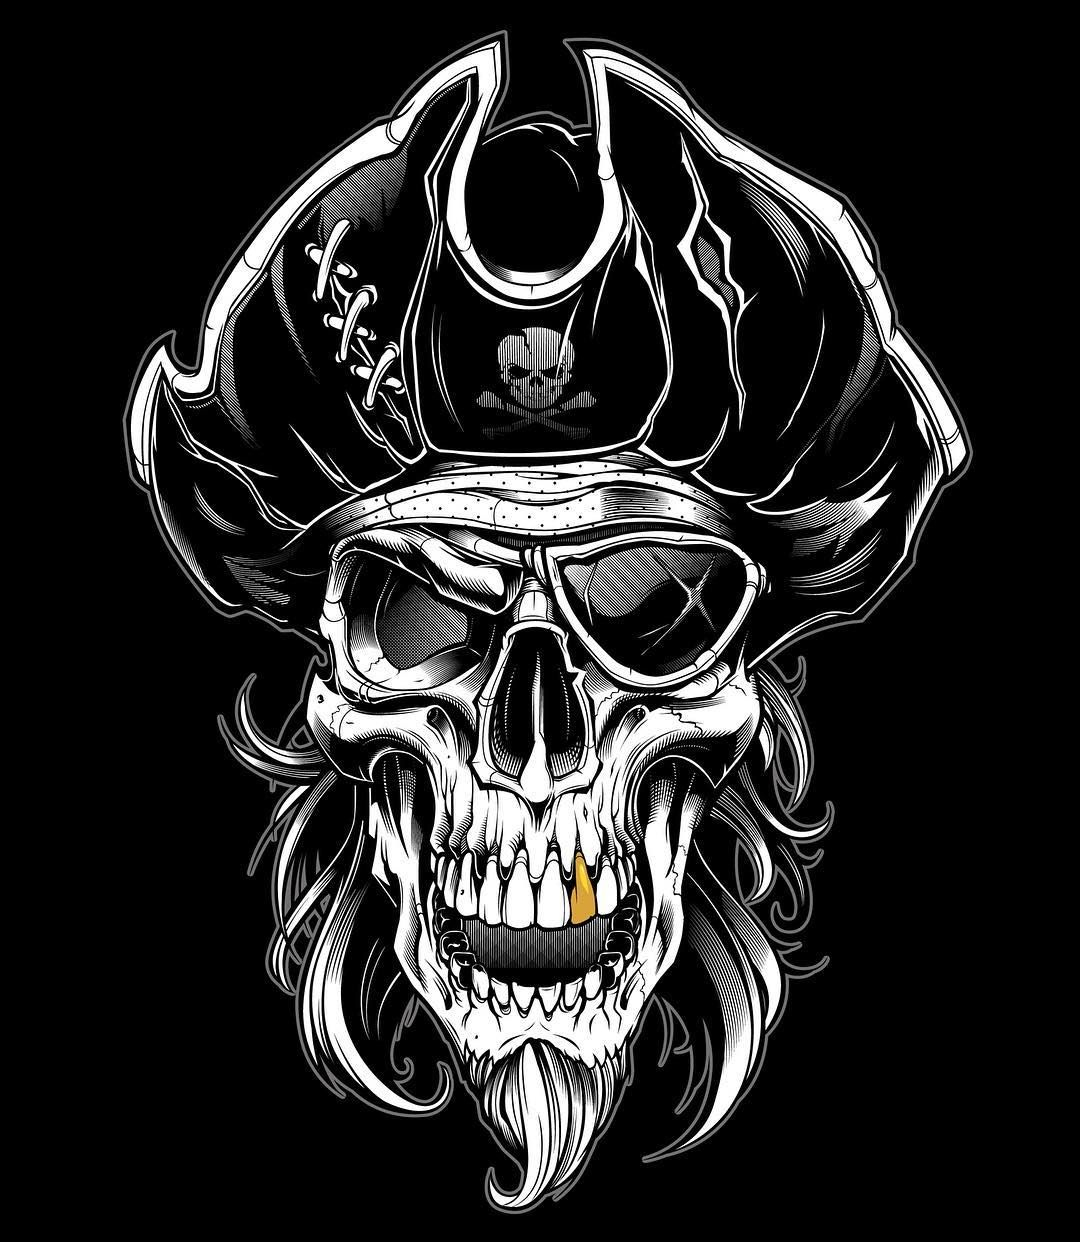 Finished Shed Piece. #Sweyda #Vector #Illustration #Pirate #Skull # à Tete De Pirate Dessin 